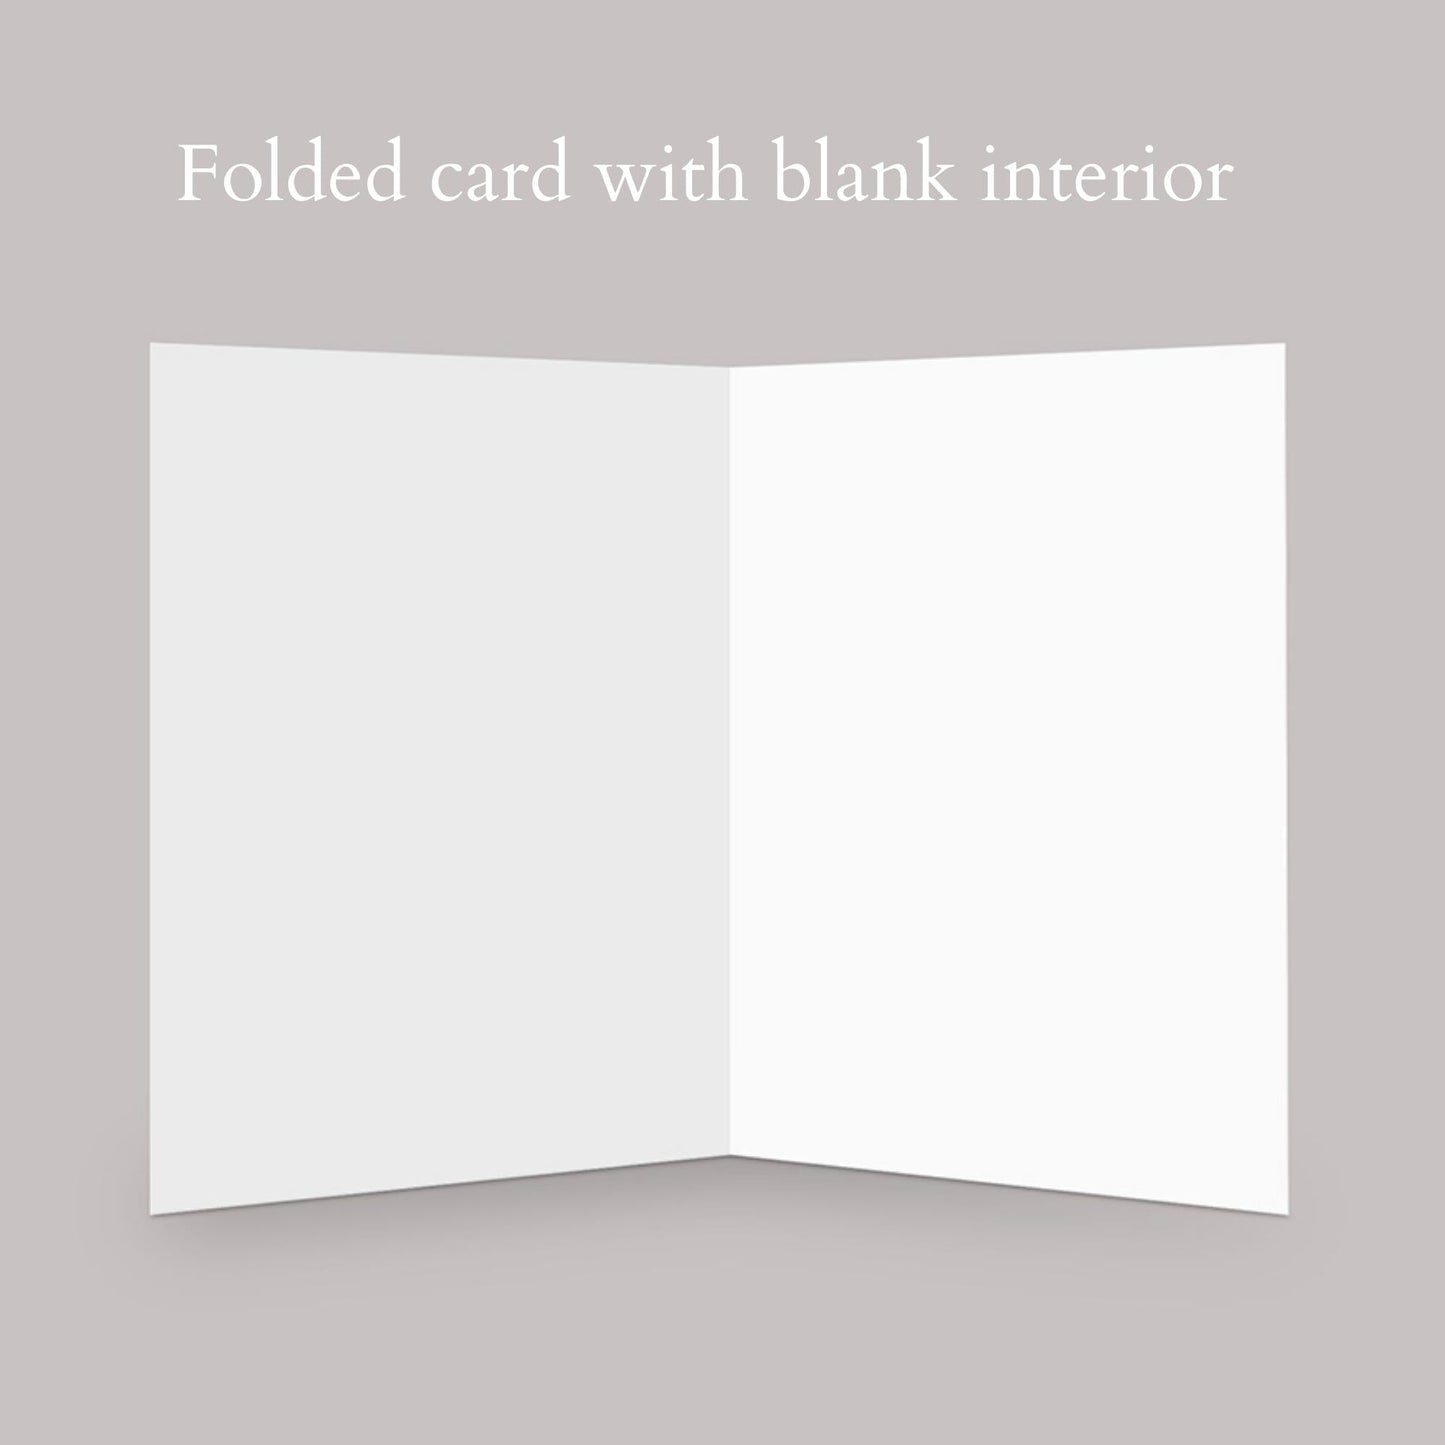 all cards have a blank interior